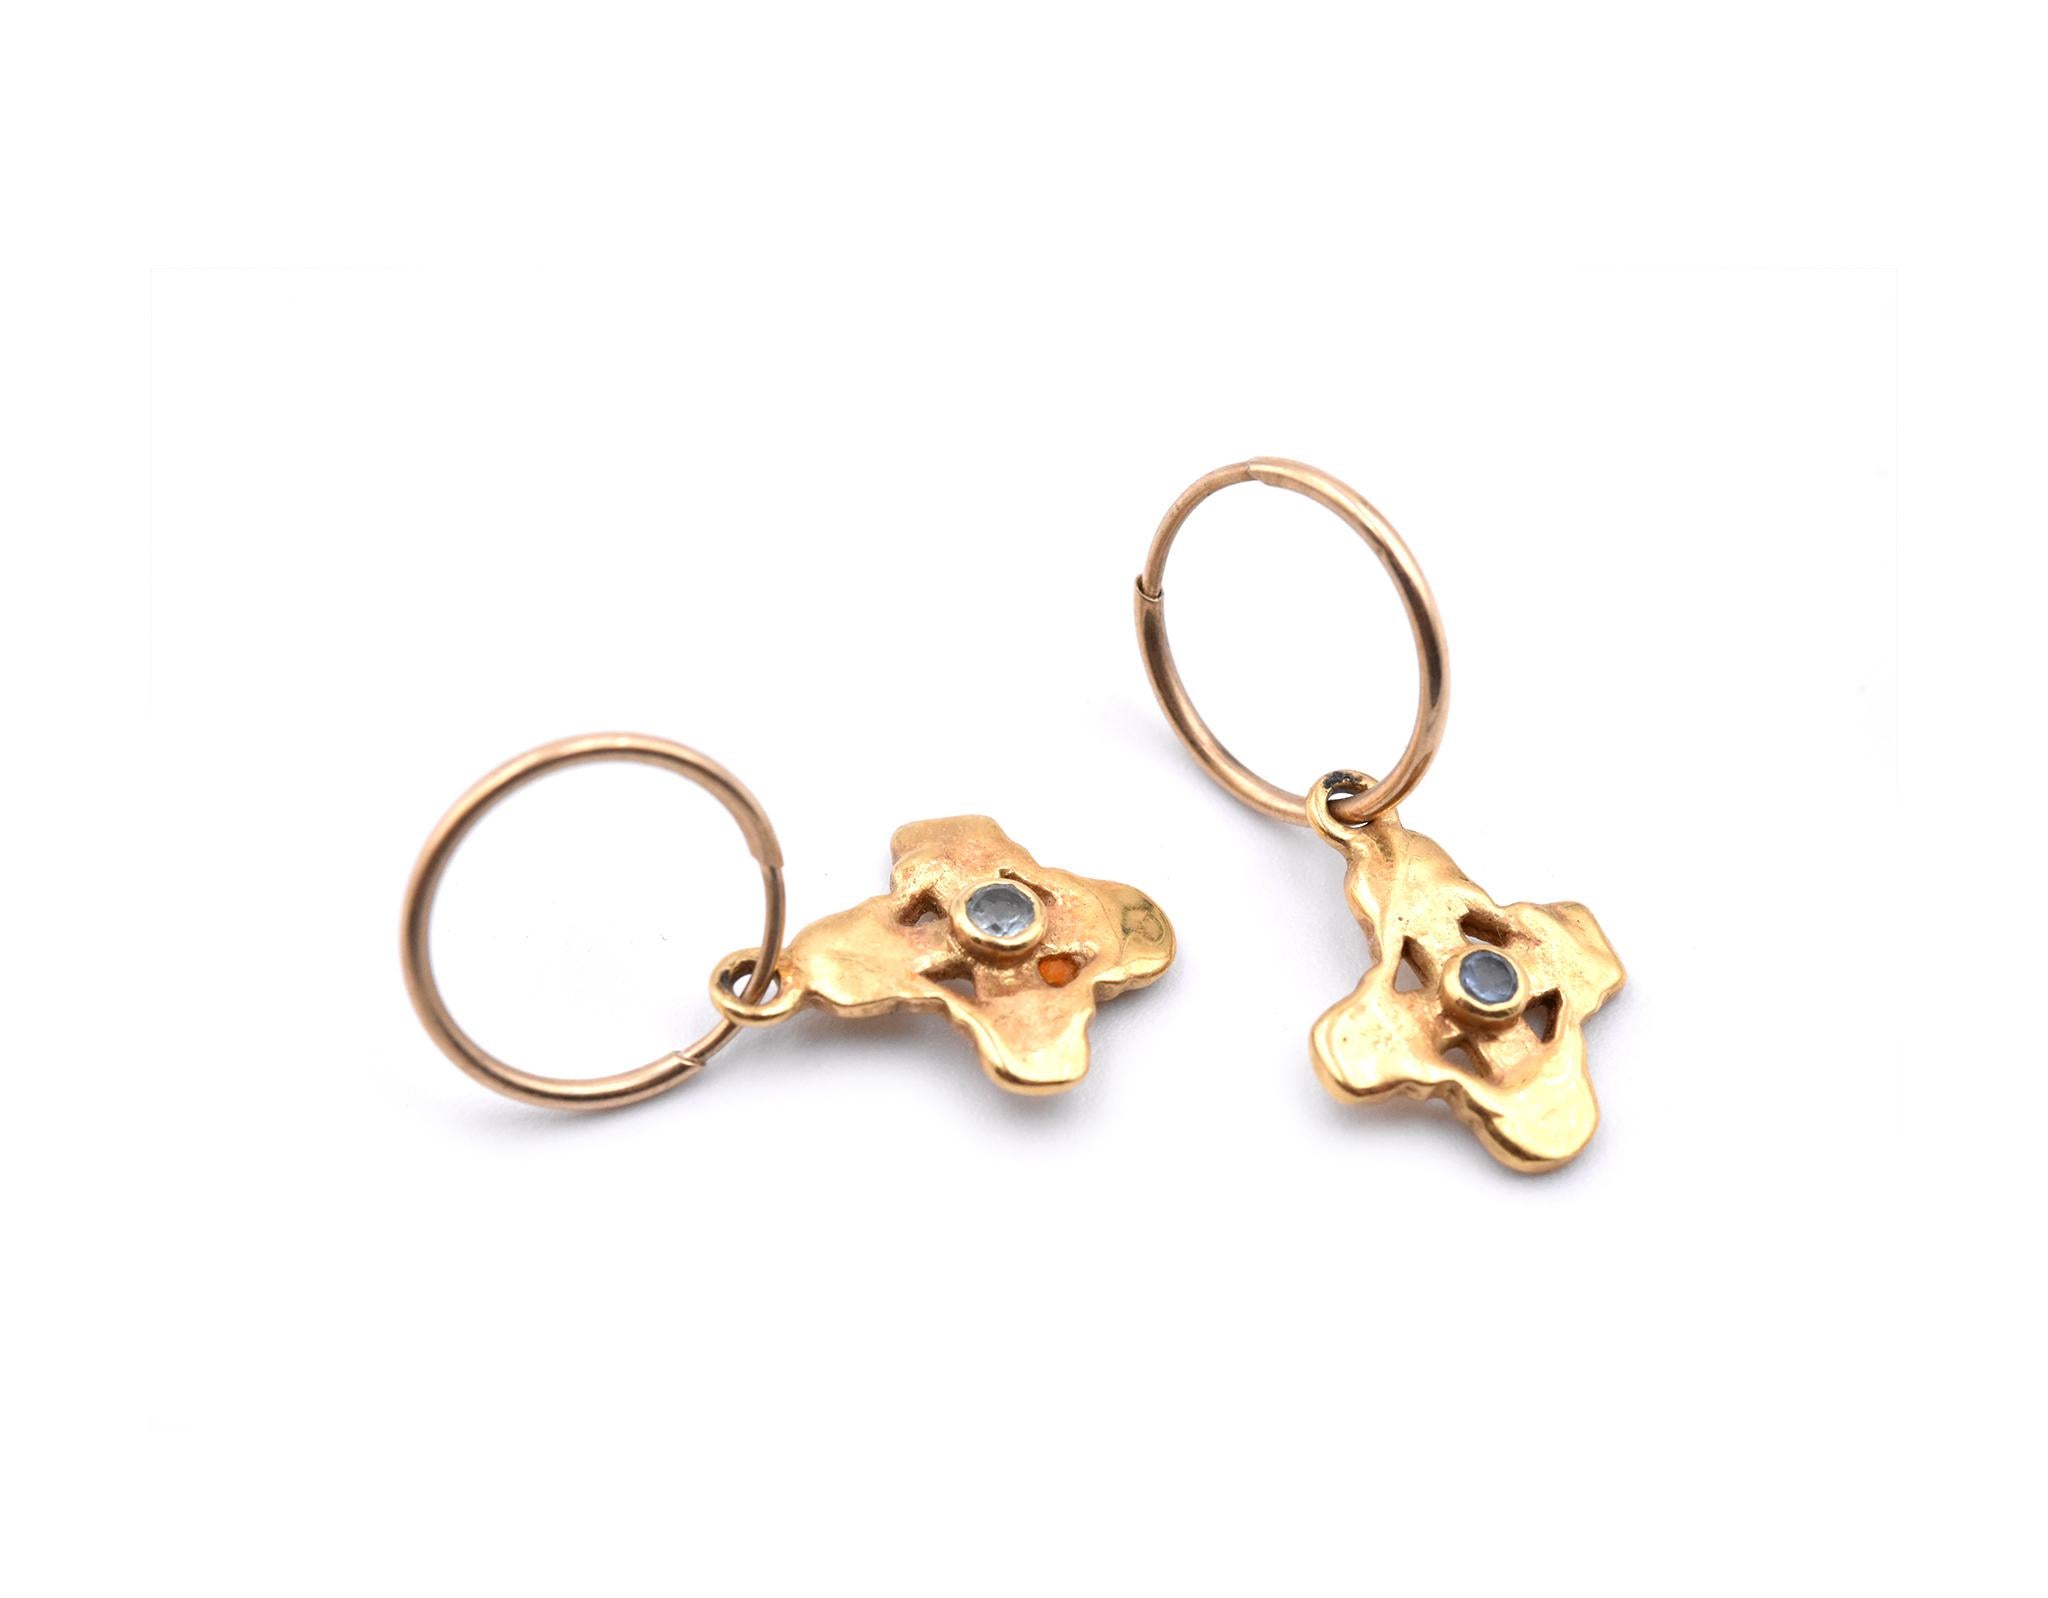 Designer: Lee Brevard
Material: 18K Yellow Gold 
Dimensions: the earring measures 24.99 X 11.10mm
Weight:  2.54 grams
